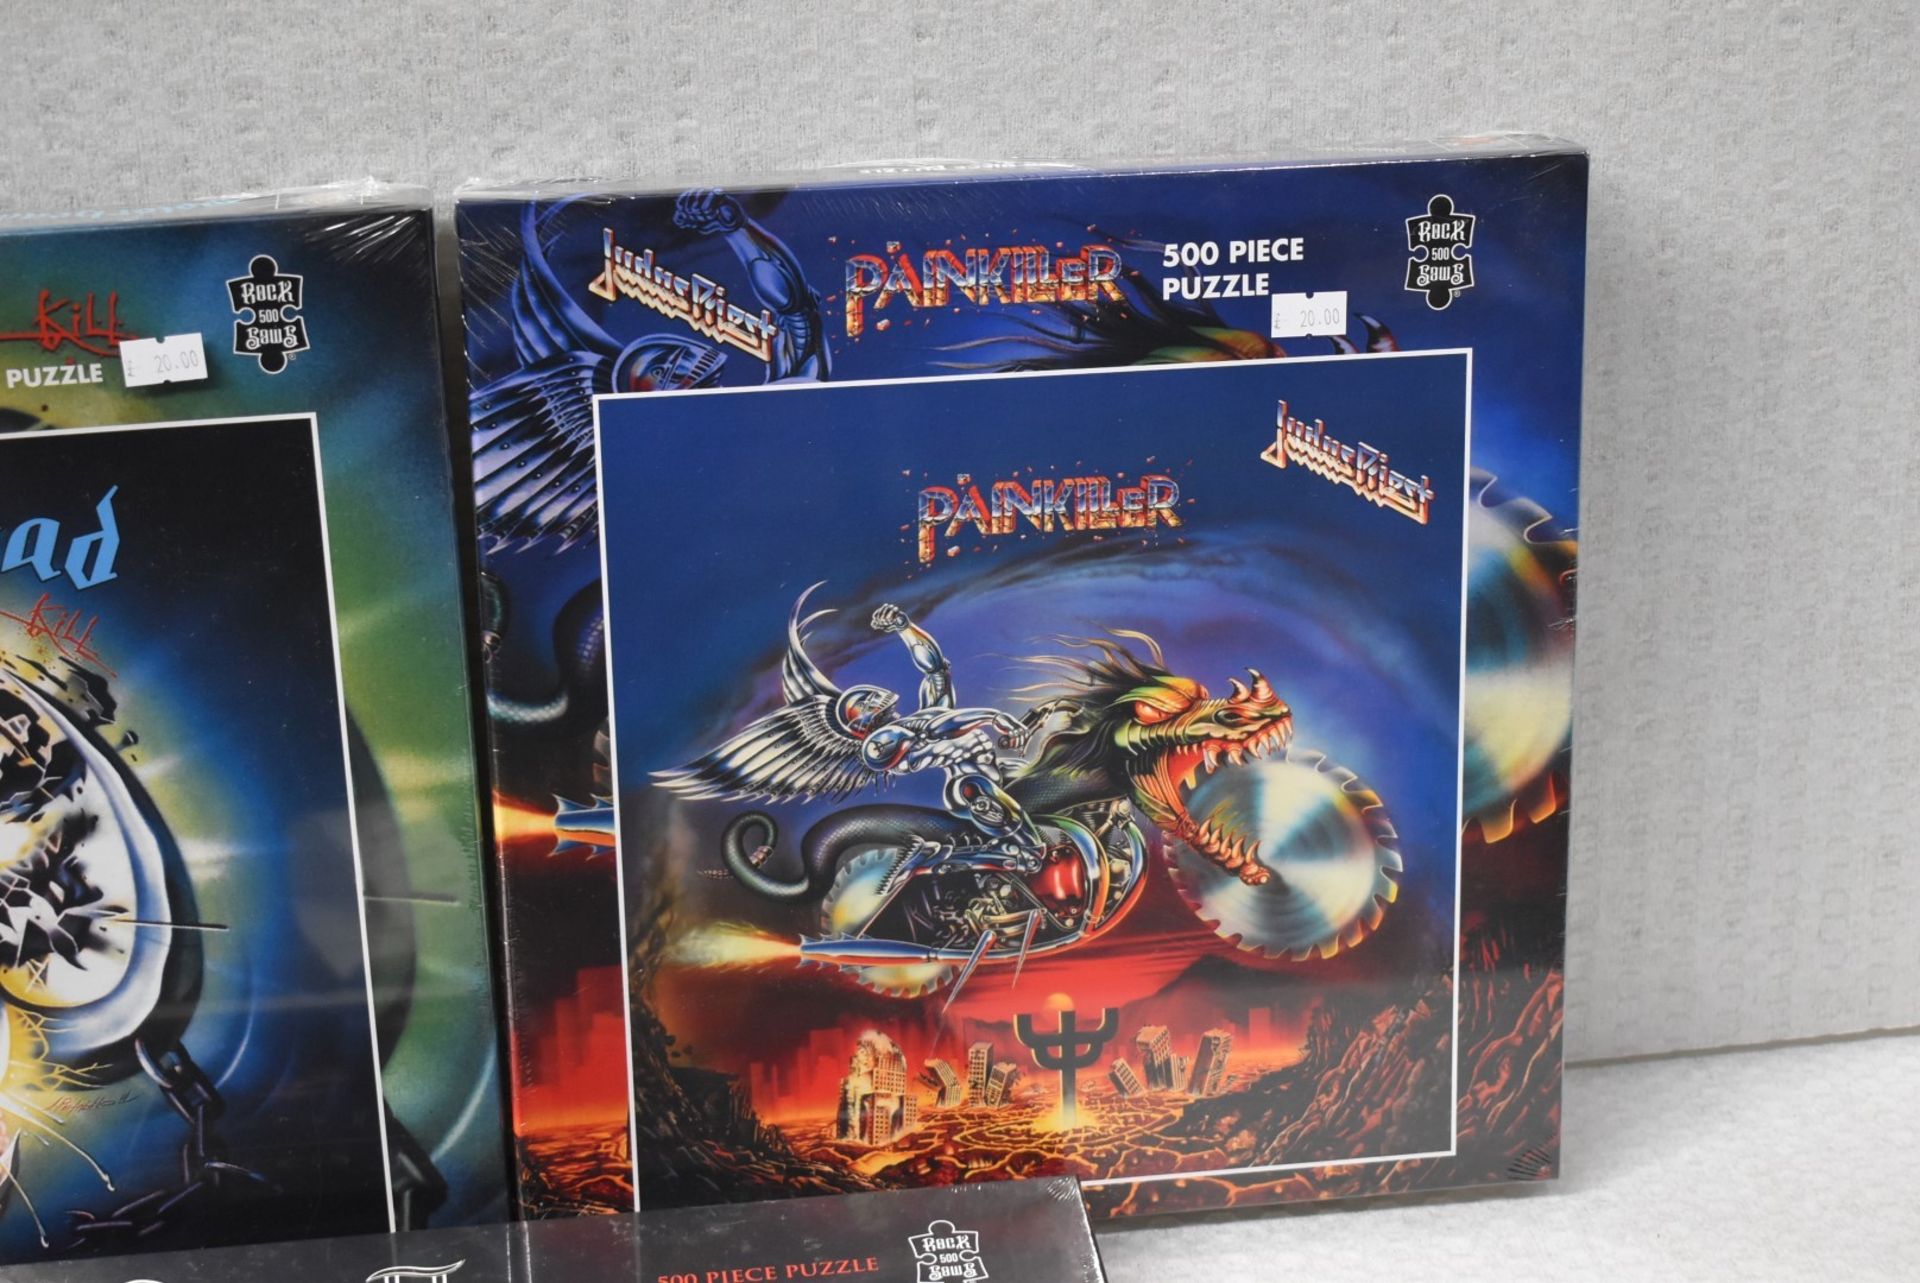 3 x 500 Piece Jigsaws By Rock Saws - Includes Judas Priest, Queen & Motorhead - RRP £60 - Image 3 of 4